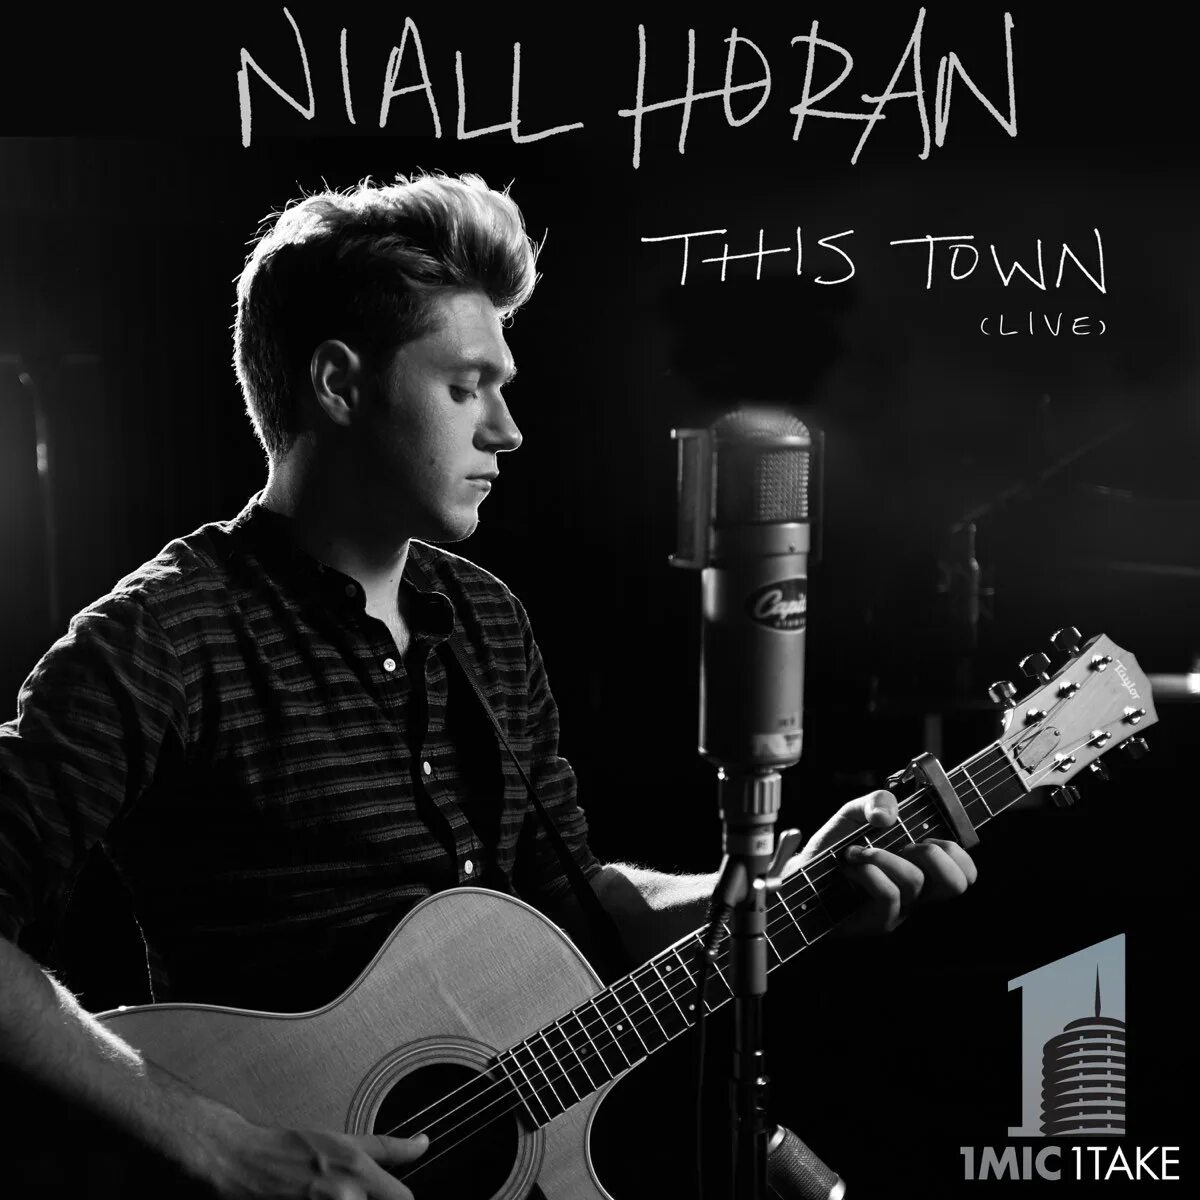 This town small. Обложка Niall Horan this Town. Обложка альбома Niall Horan. Обложка альбома Niall Horan take me Home. Niall Horan last album.